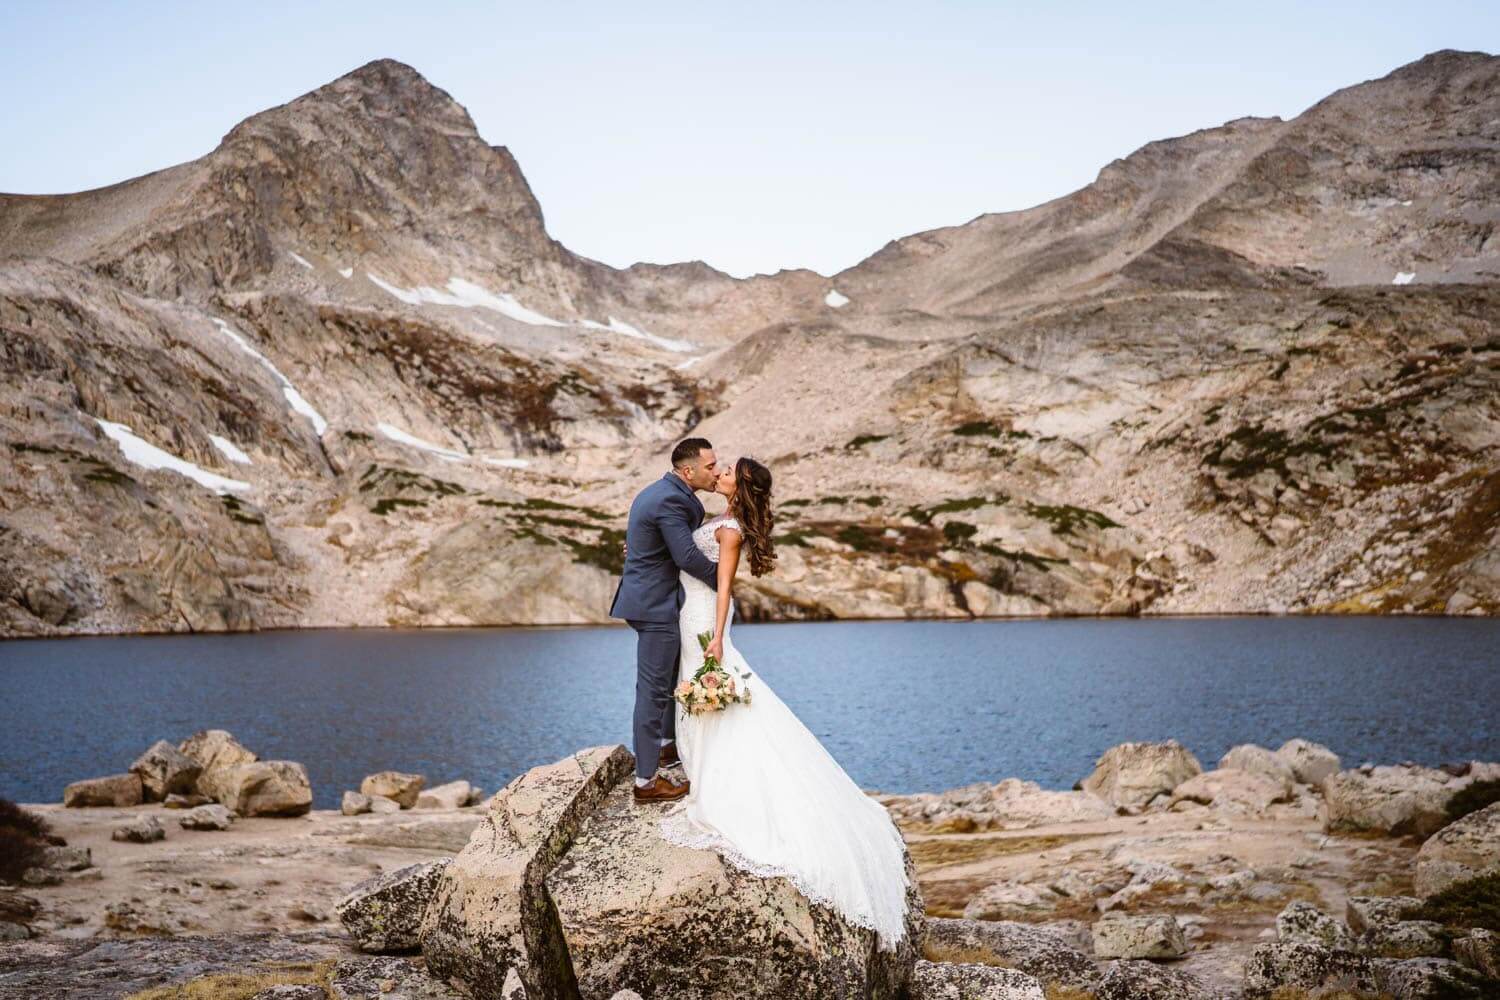 Bride and groom kissing on a rock at alpine lake in Colorado.